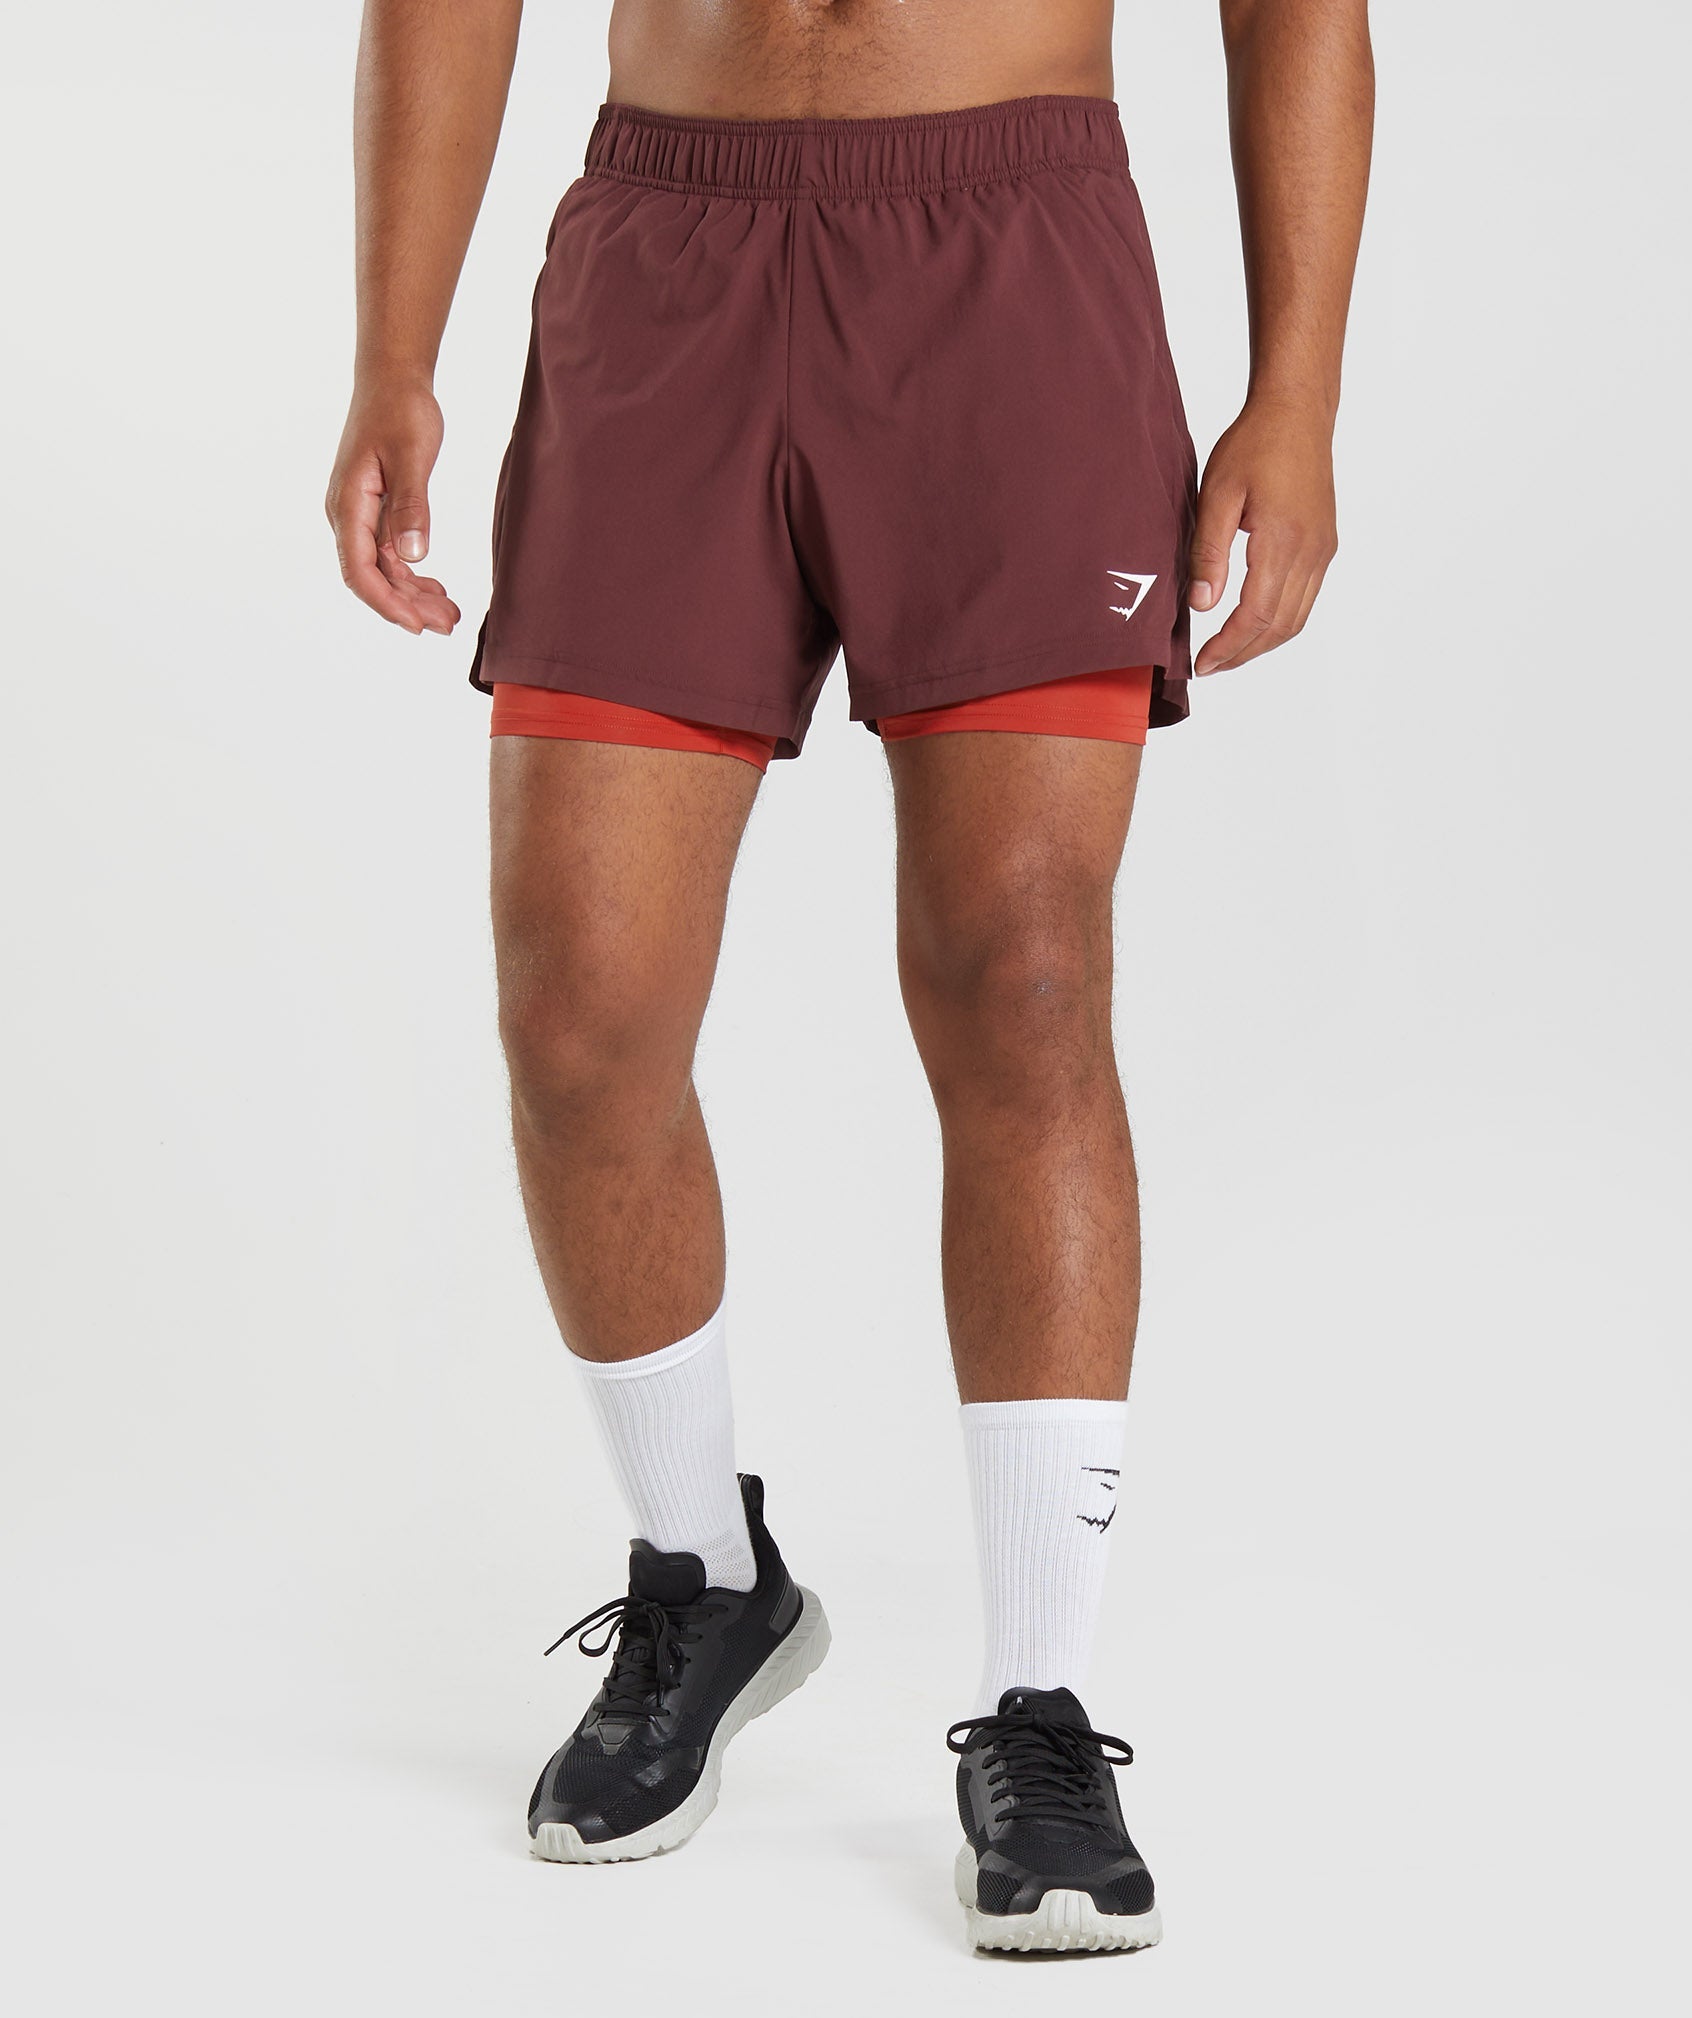 Gymshark Sport 5 2 In 1 Shorts - Baked Maroon/Salsa Red